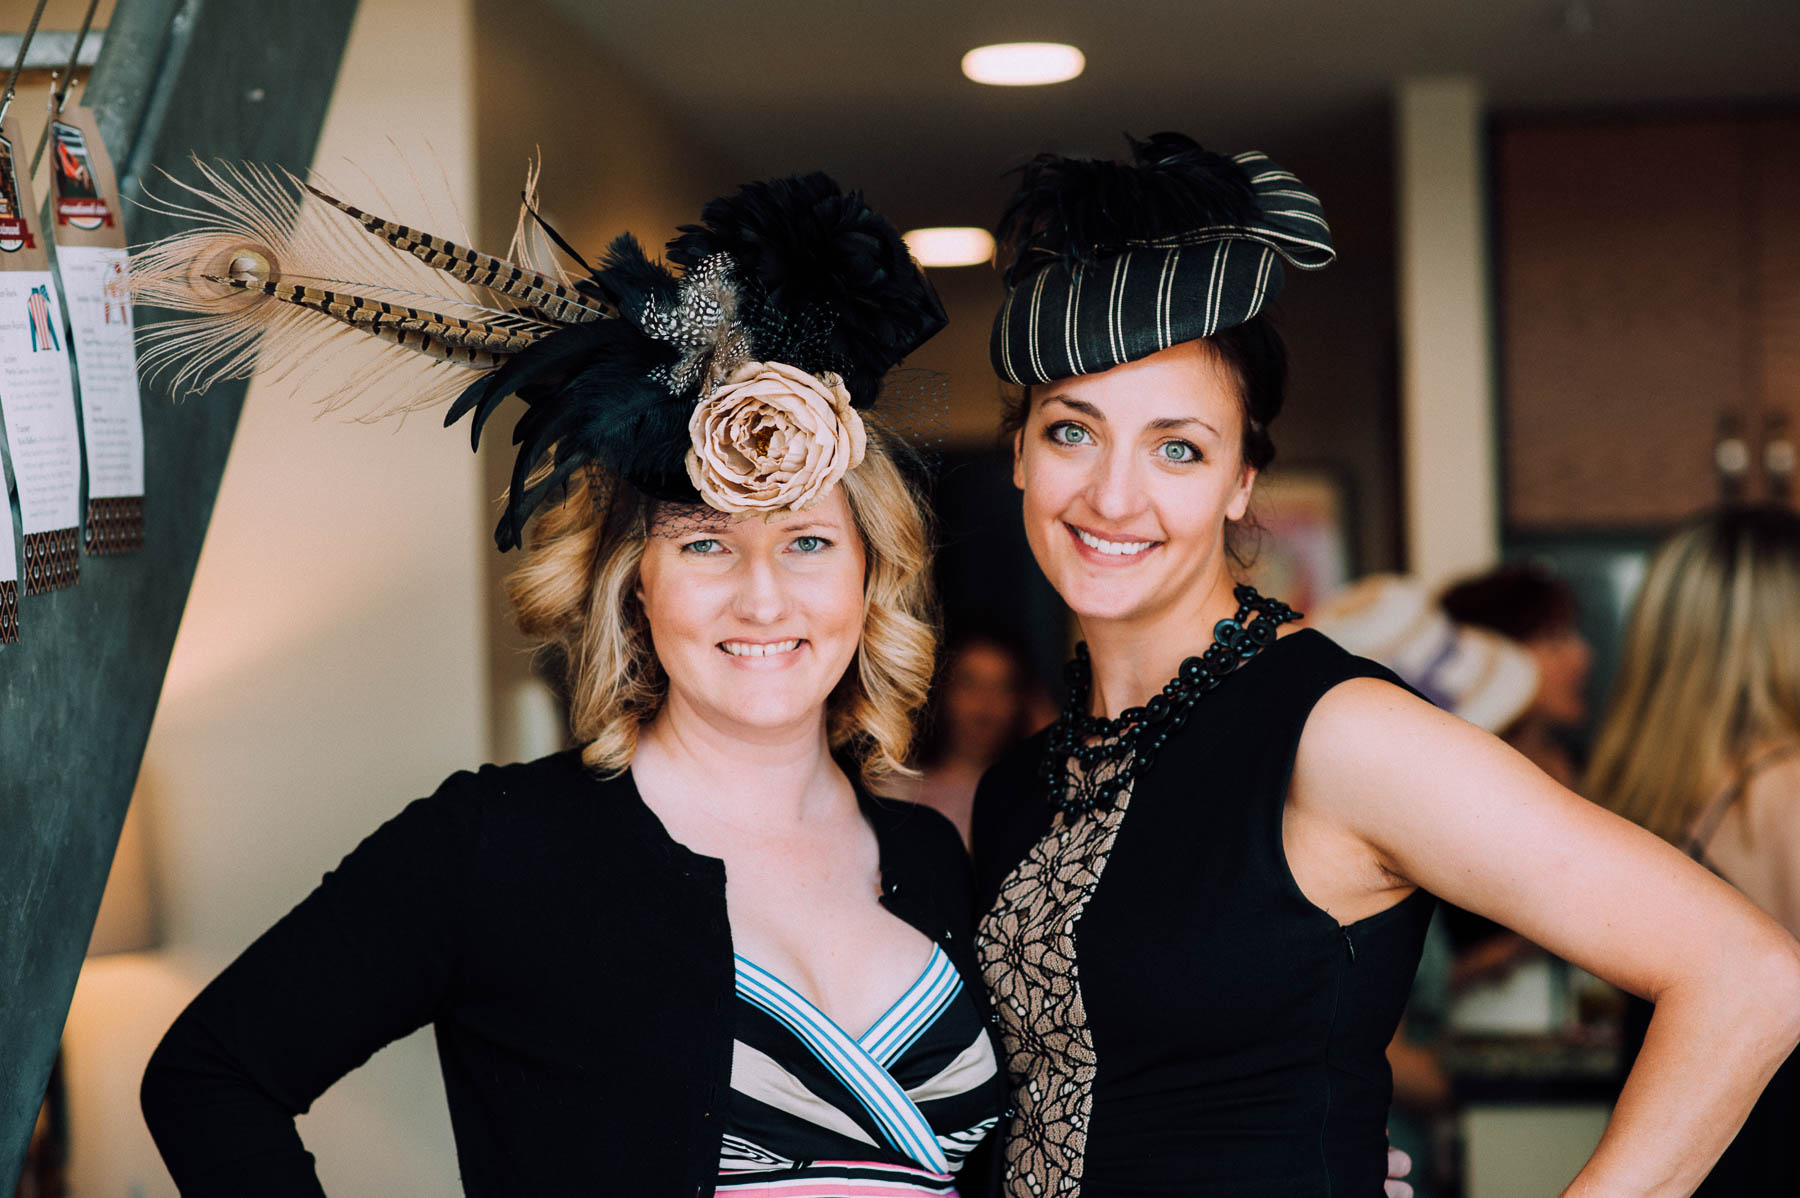 2015 Kentucky Derby Party at Bobby and Kim’s Seattle condo.